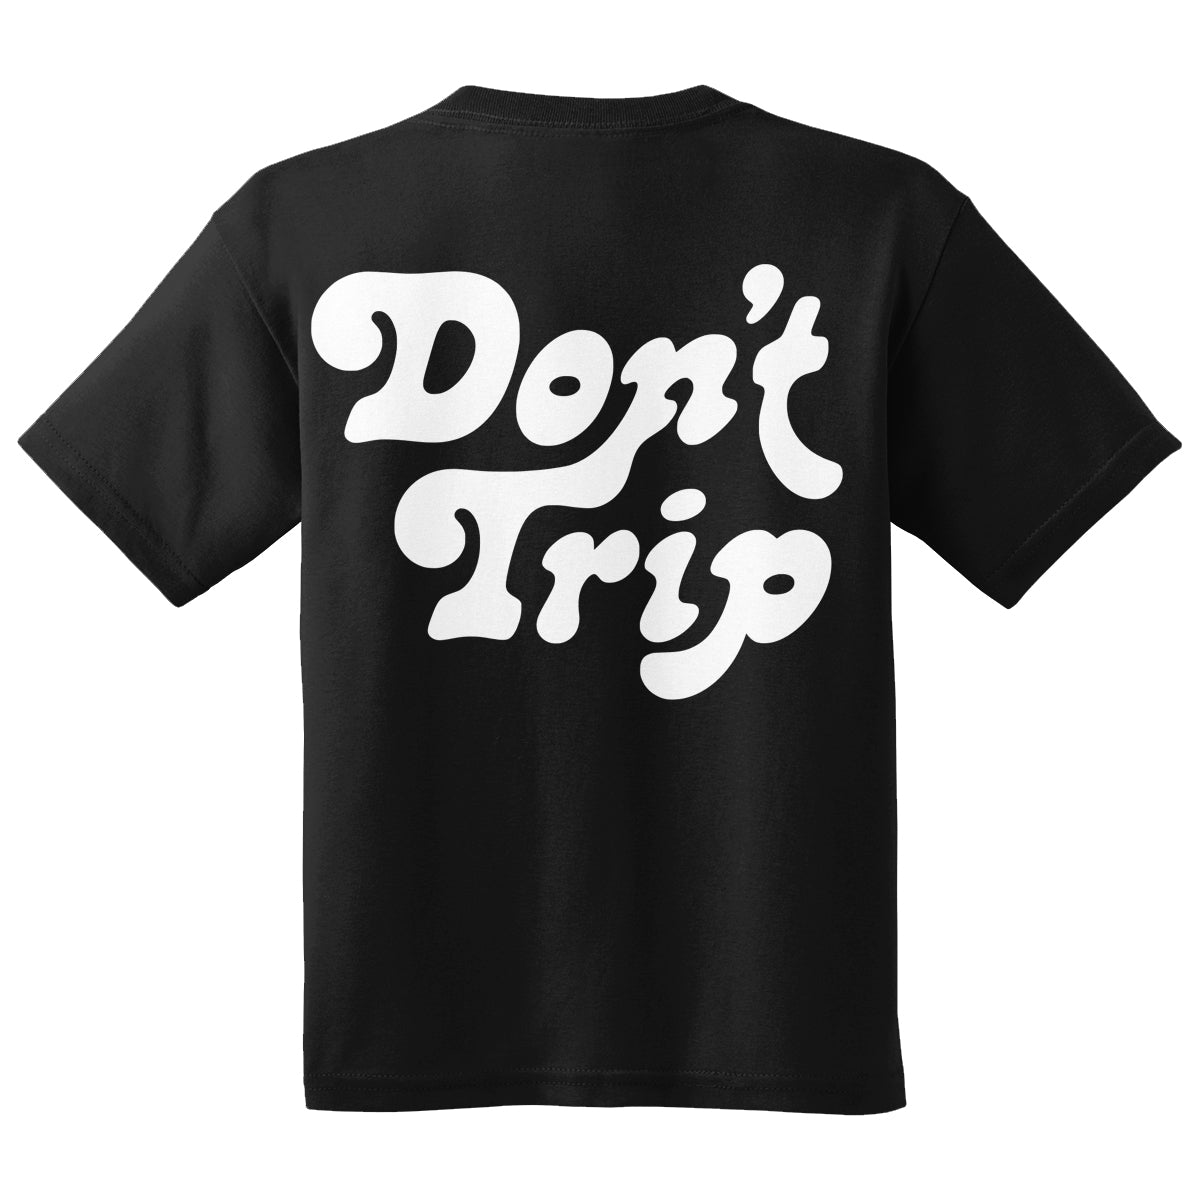 Free & Easy | Don't Trip Kids SS Tee in Black